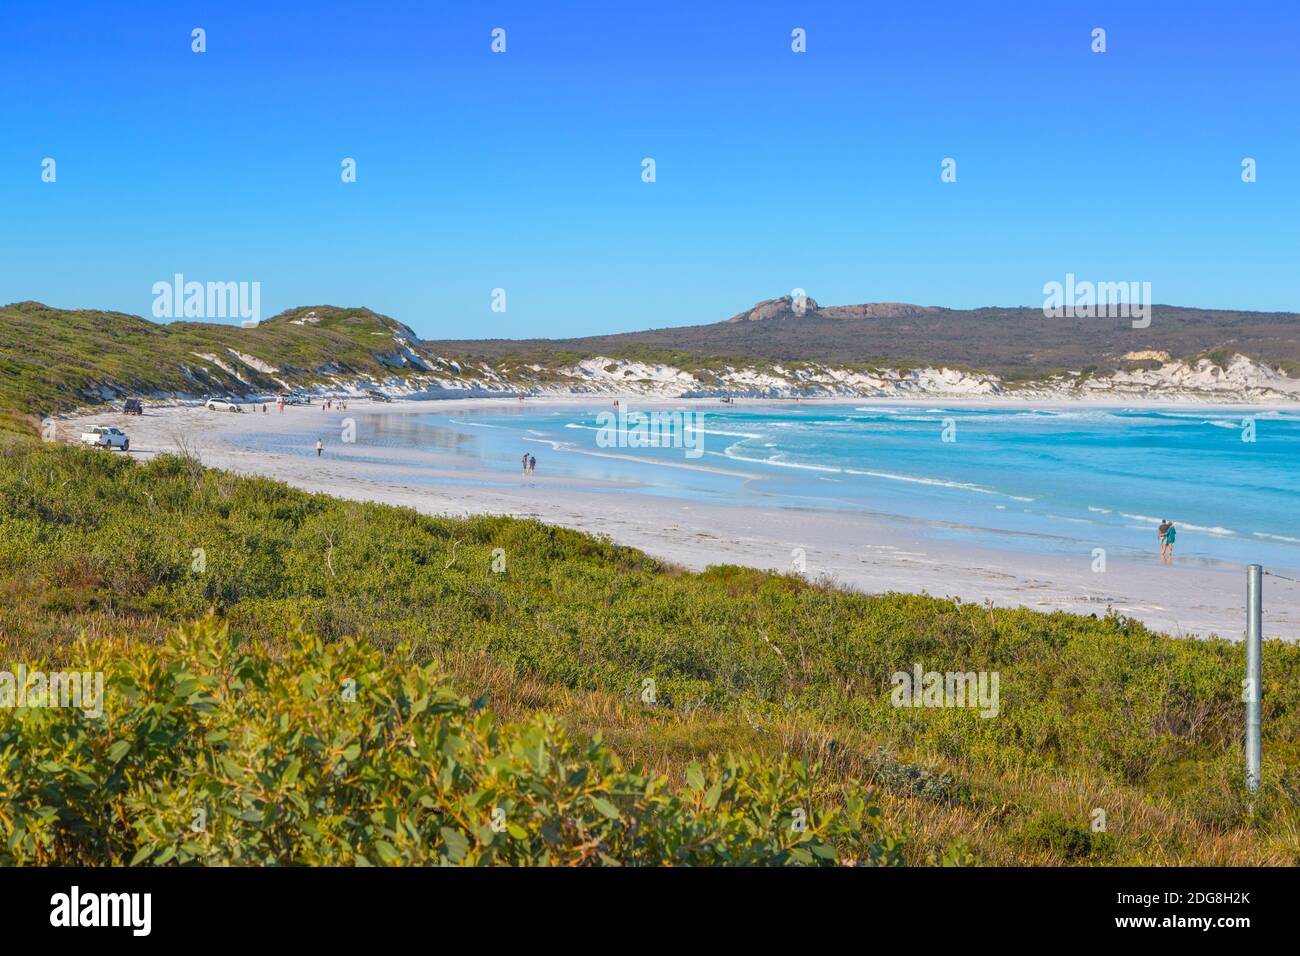 The beautiful Lucky Bay in the Cape Le Grand National Park east of Esperance, Western Australia Stock Photo